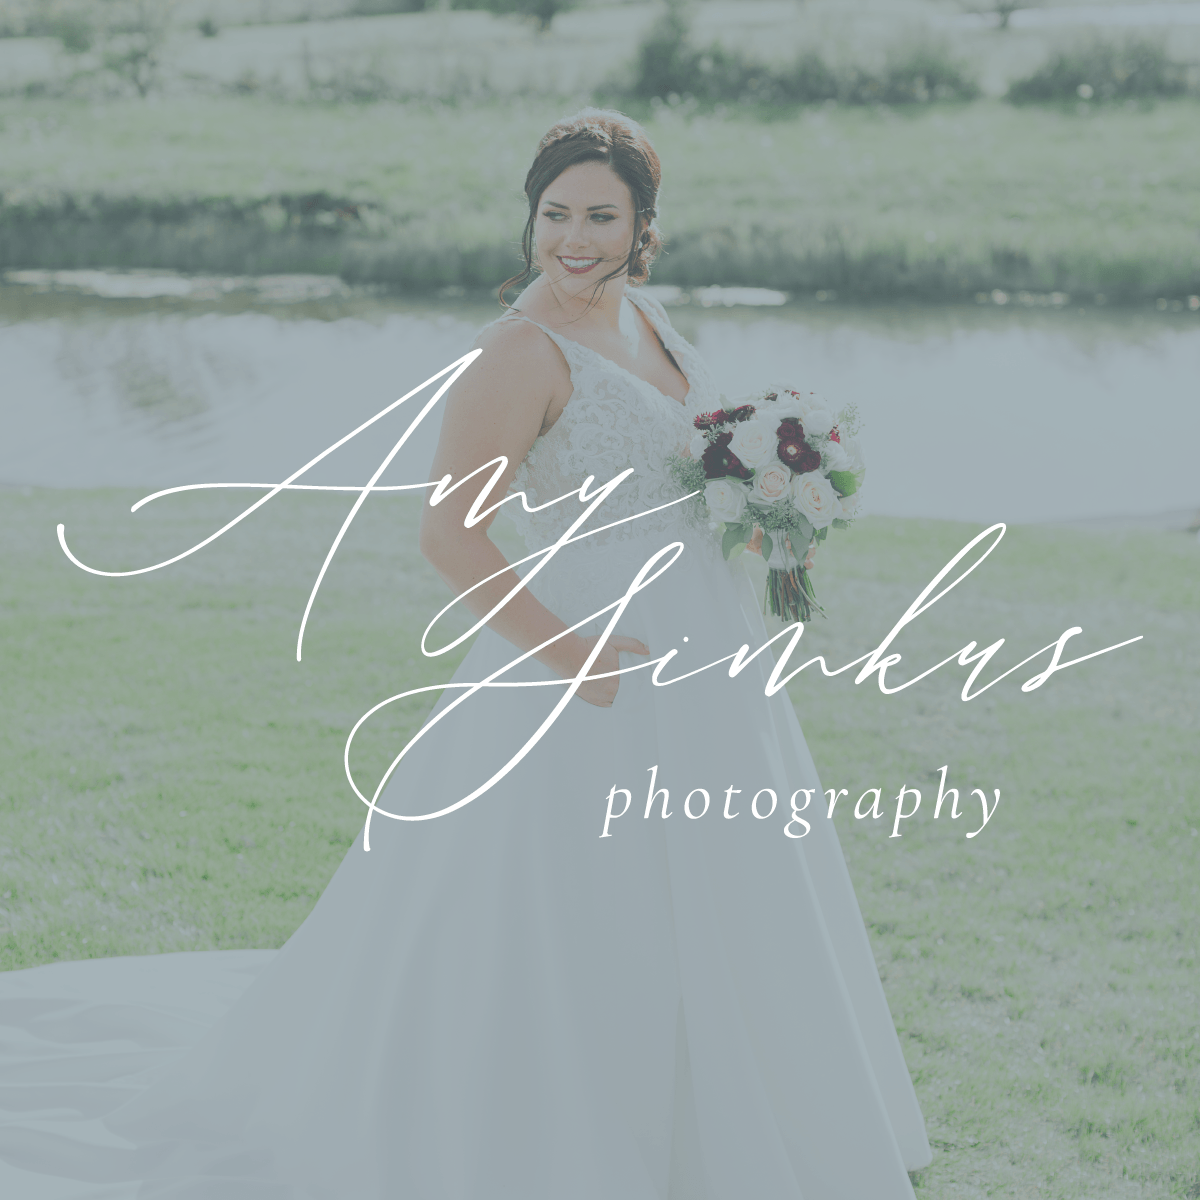 Photography Business brand and website design - Amy Simkus Photography’s Primary Logo